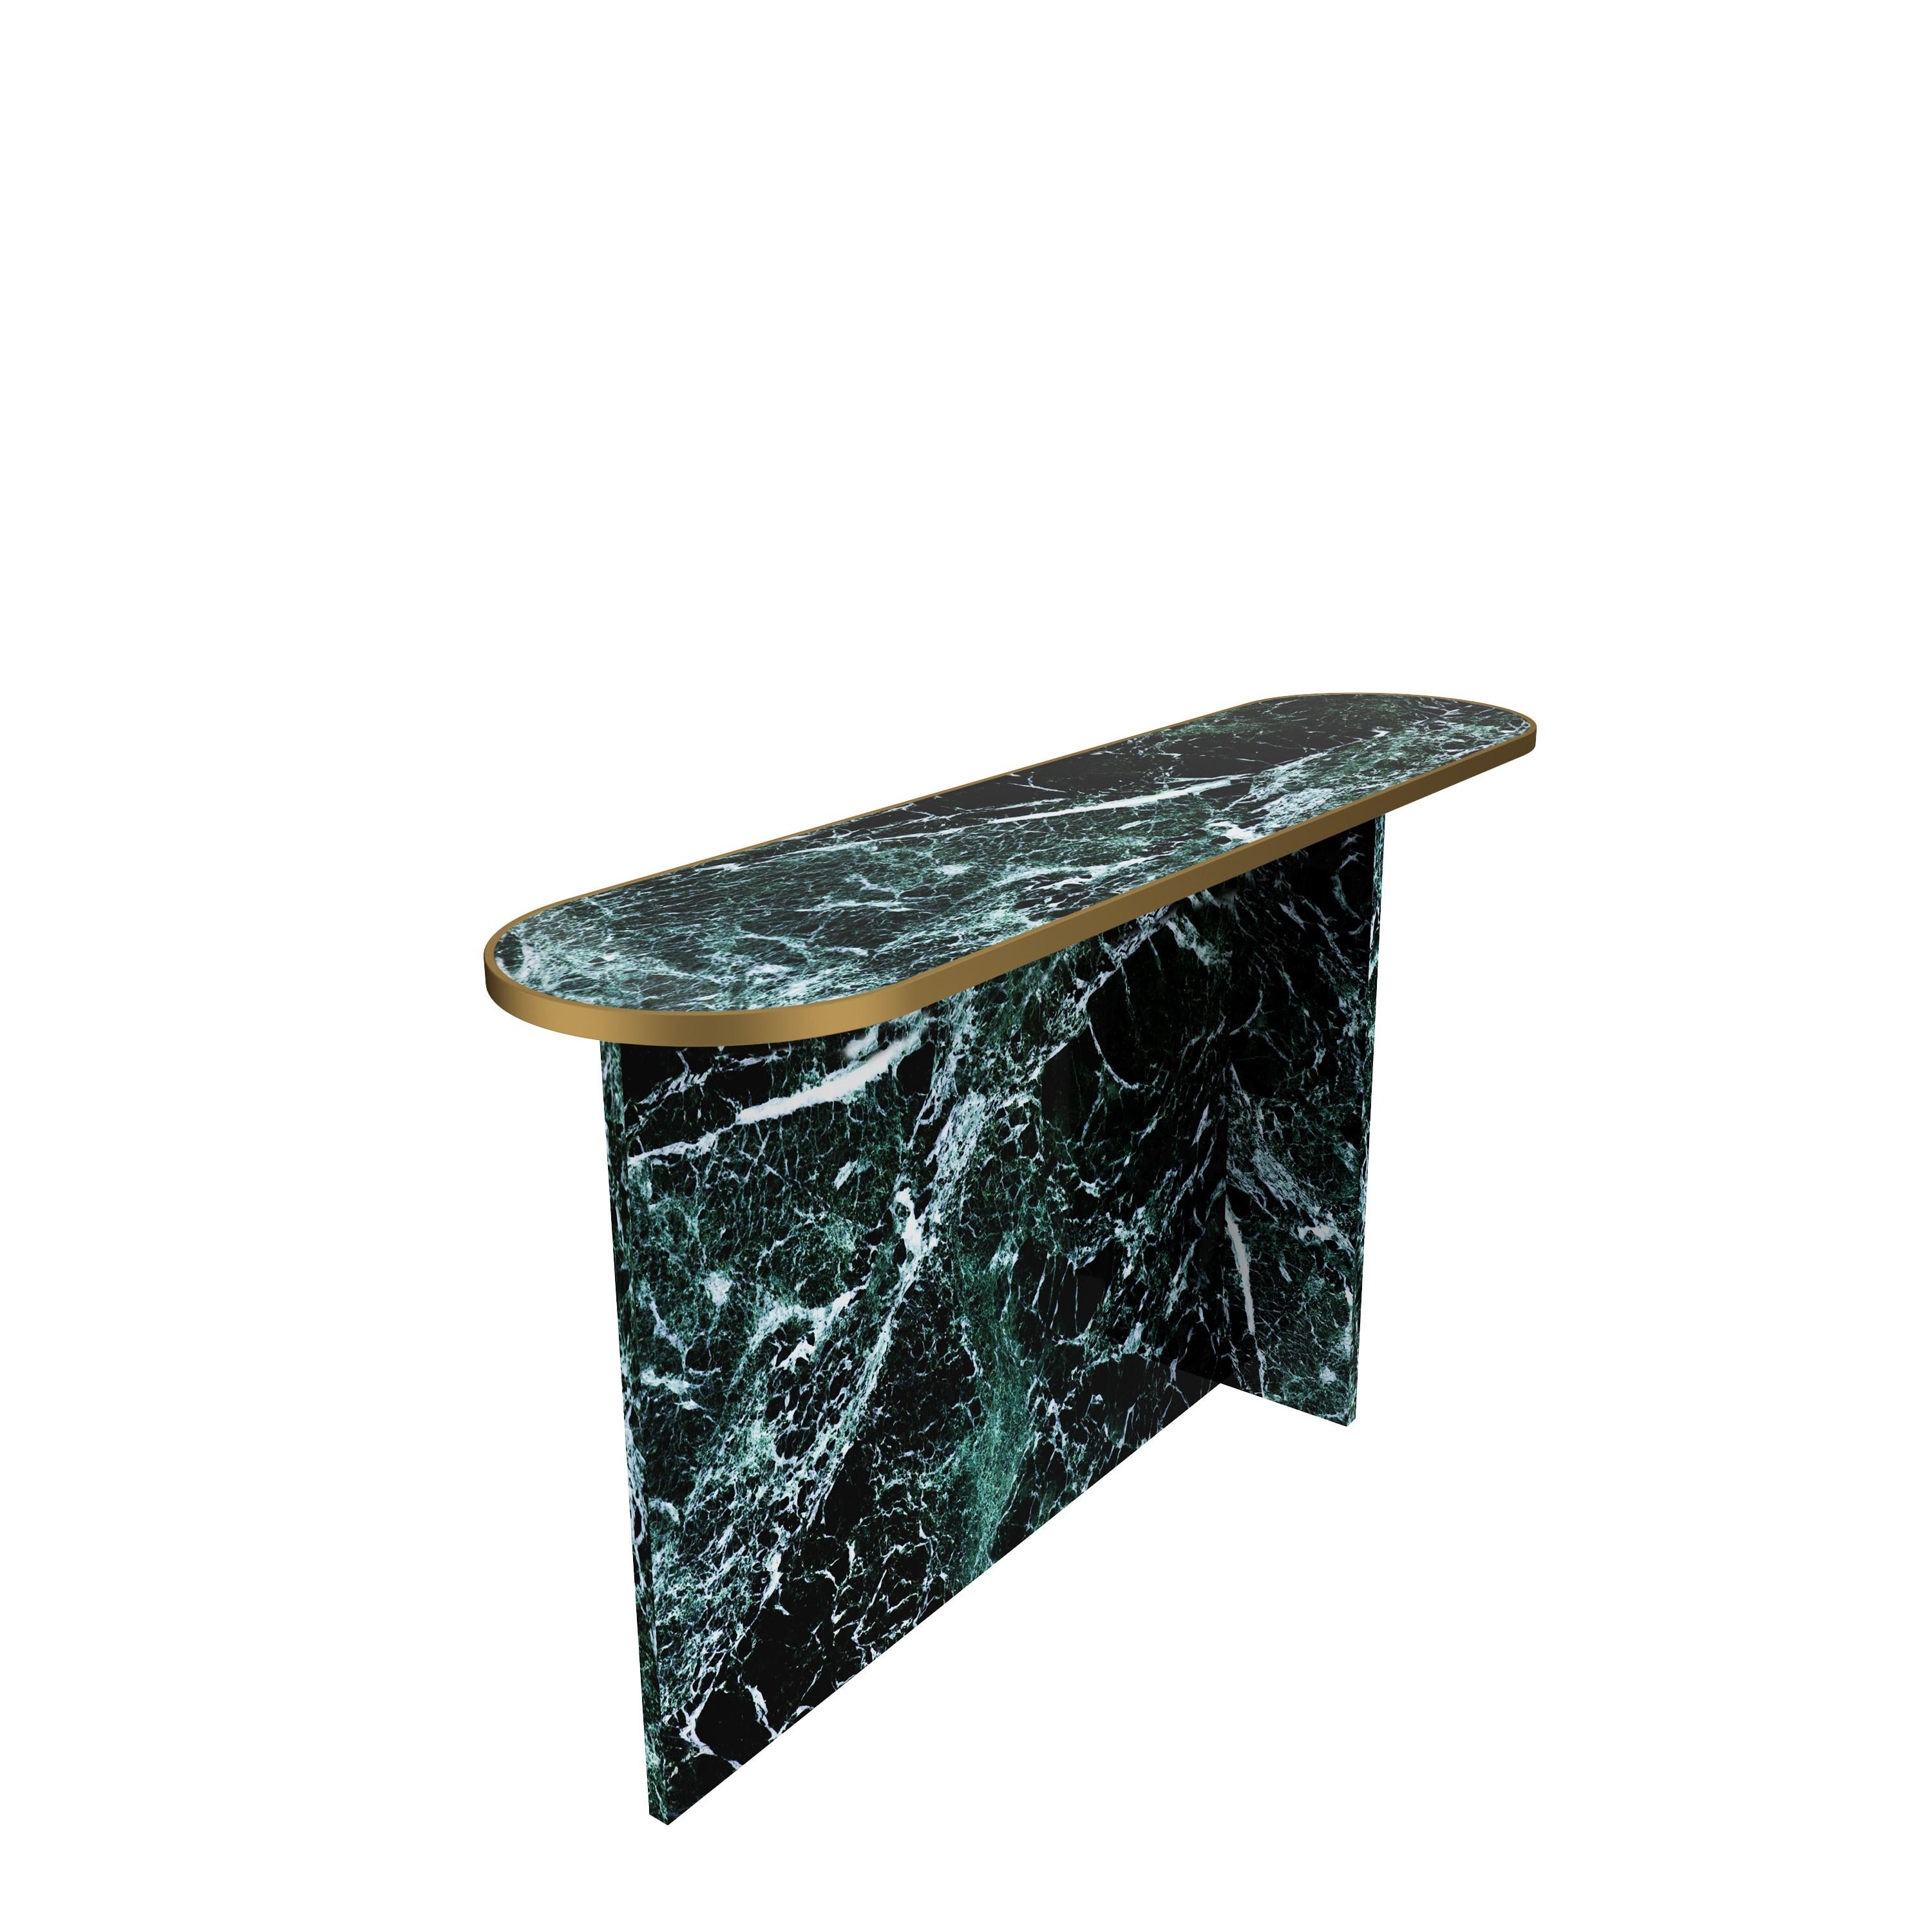 𝗣𝗿𝗼𝗱𝘂𝗰𝘁 𝗗𝗲𝘁𝗮𝗶𝗹𝘀:
The versatility in this design makes these tables functional and beautiful in every way. Used as a console table, side table, or even as a coffee table, their design makes them easy to match with other smaller